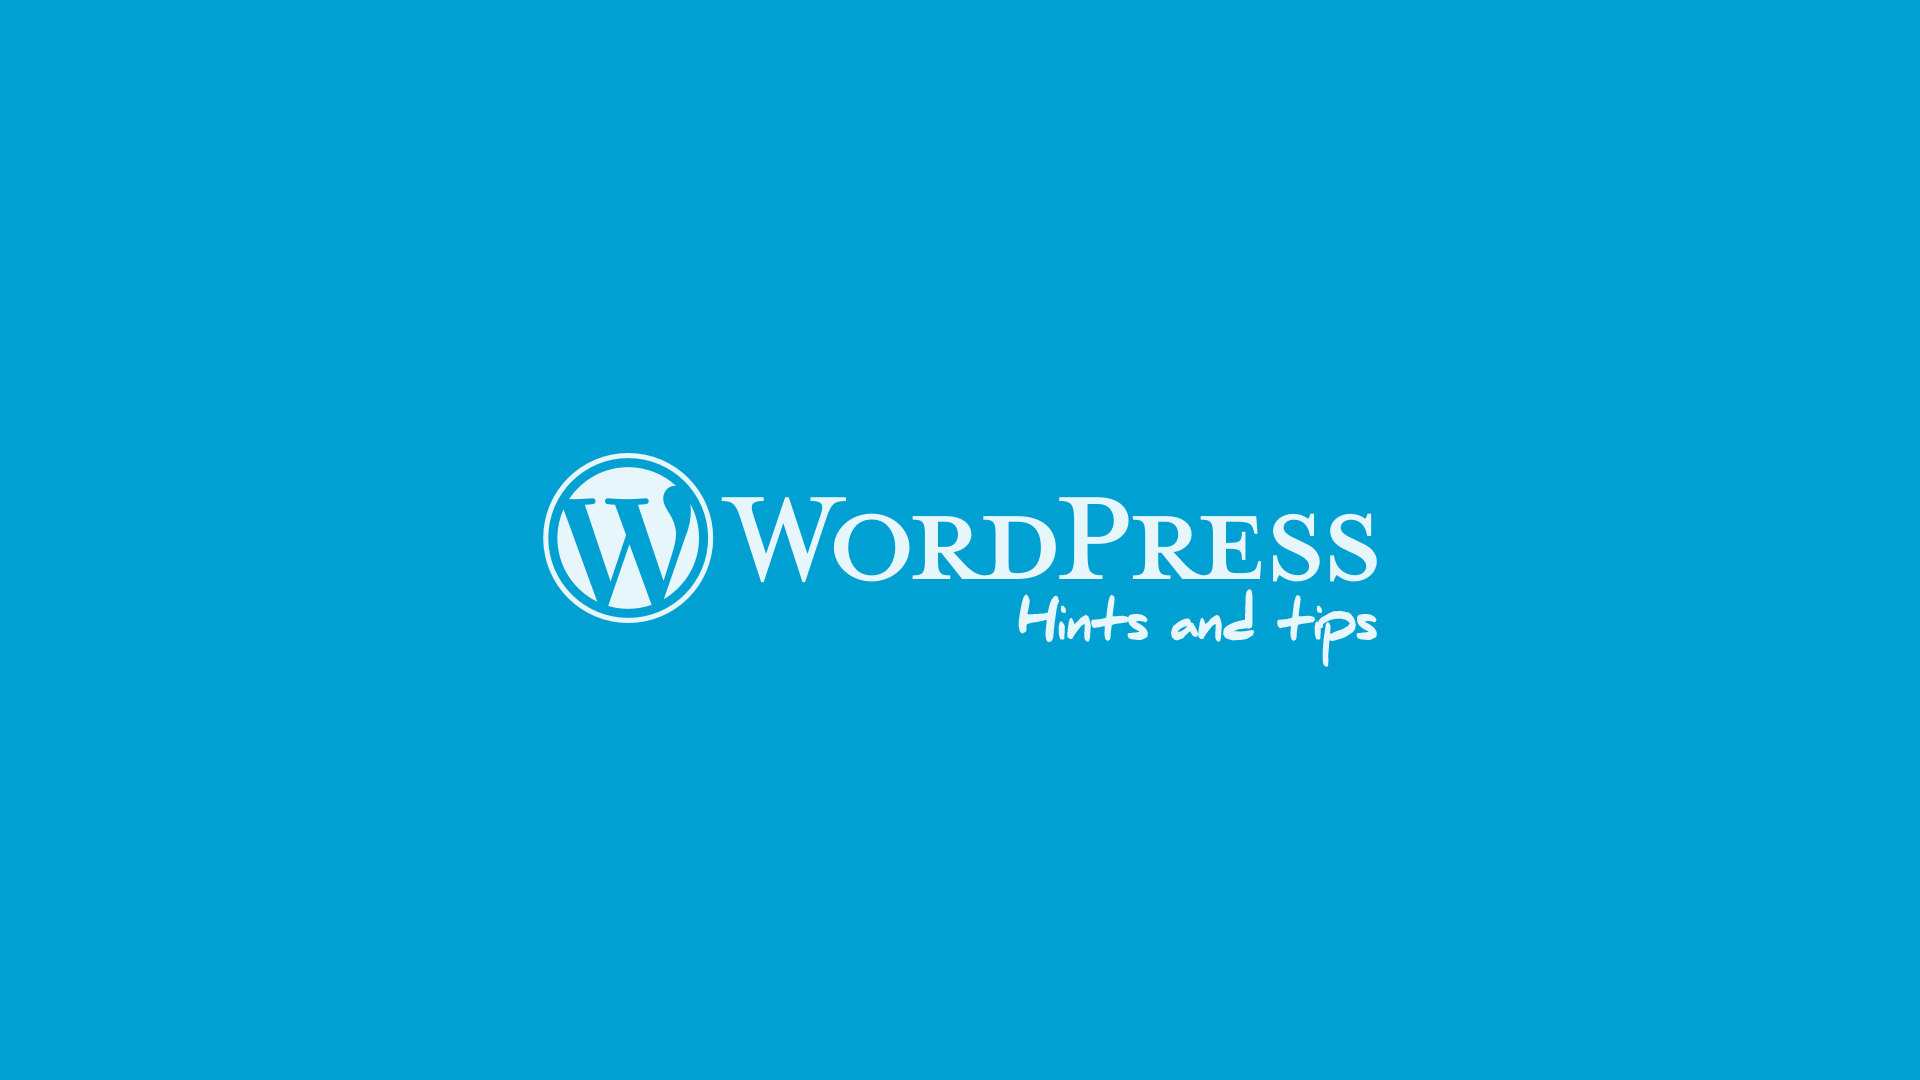 Co authors in your WordPress RSS feeds 1